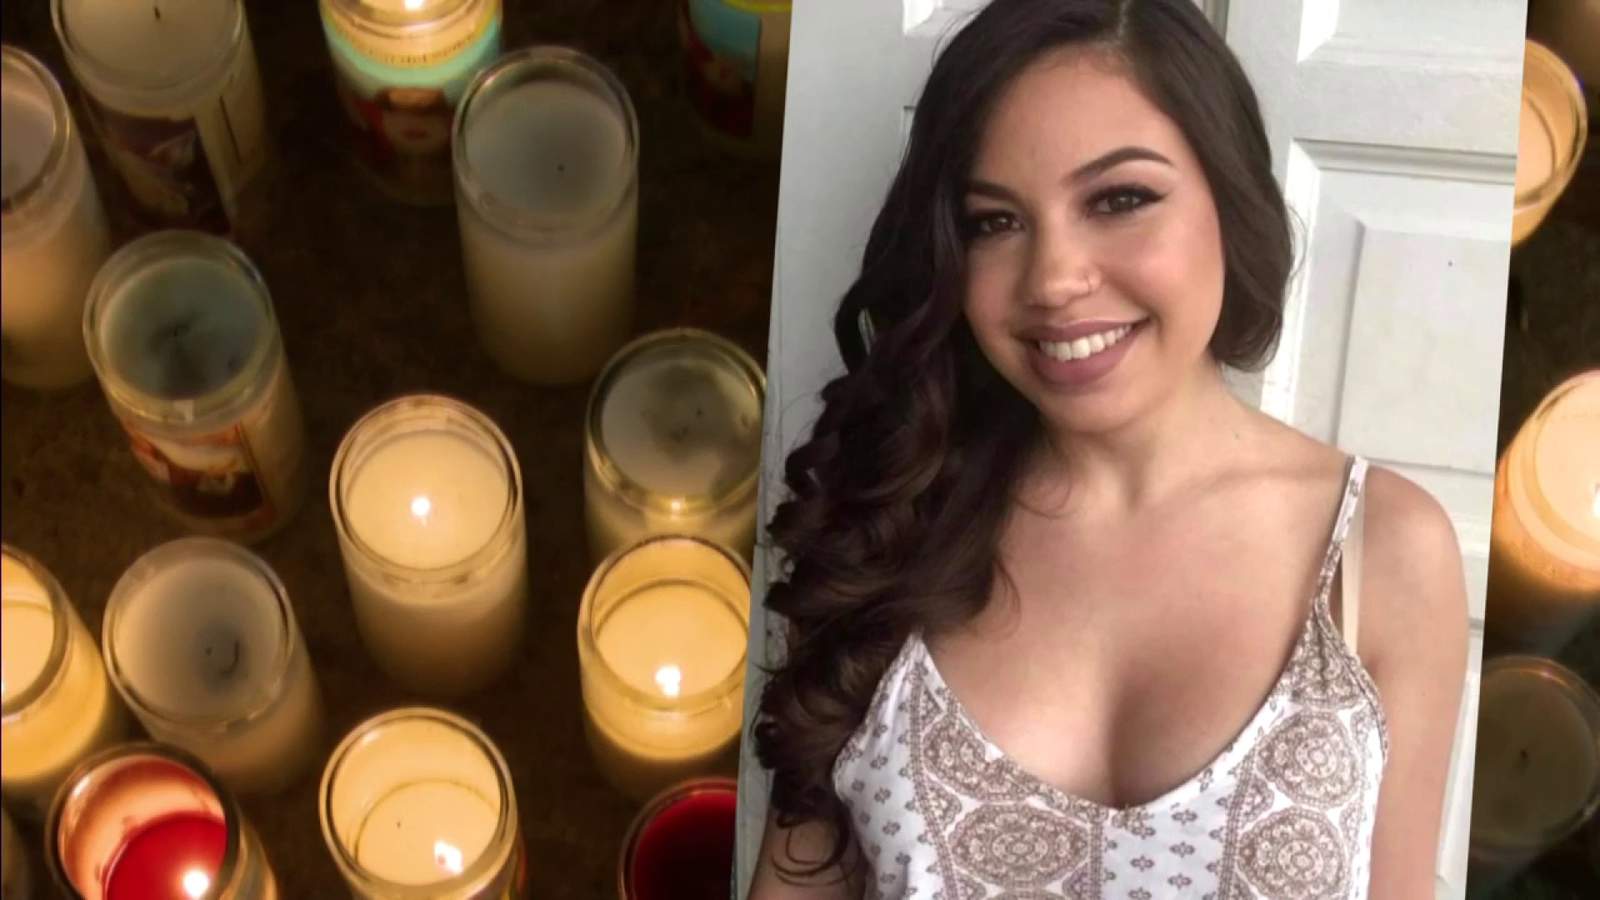 21-year-old girl was driving 3 friends home when all were killed in New Year’s crash